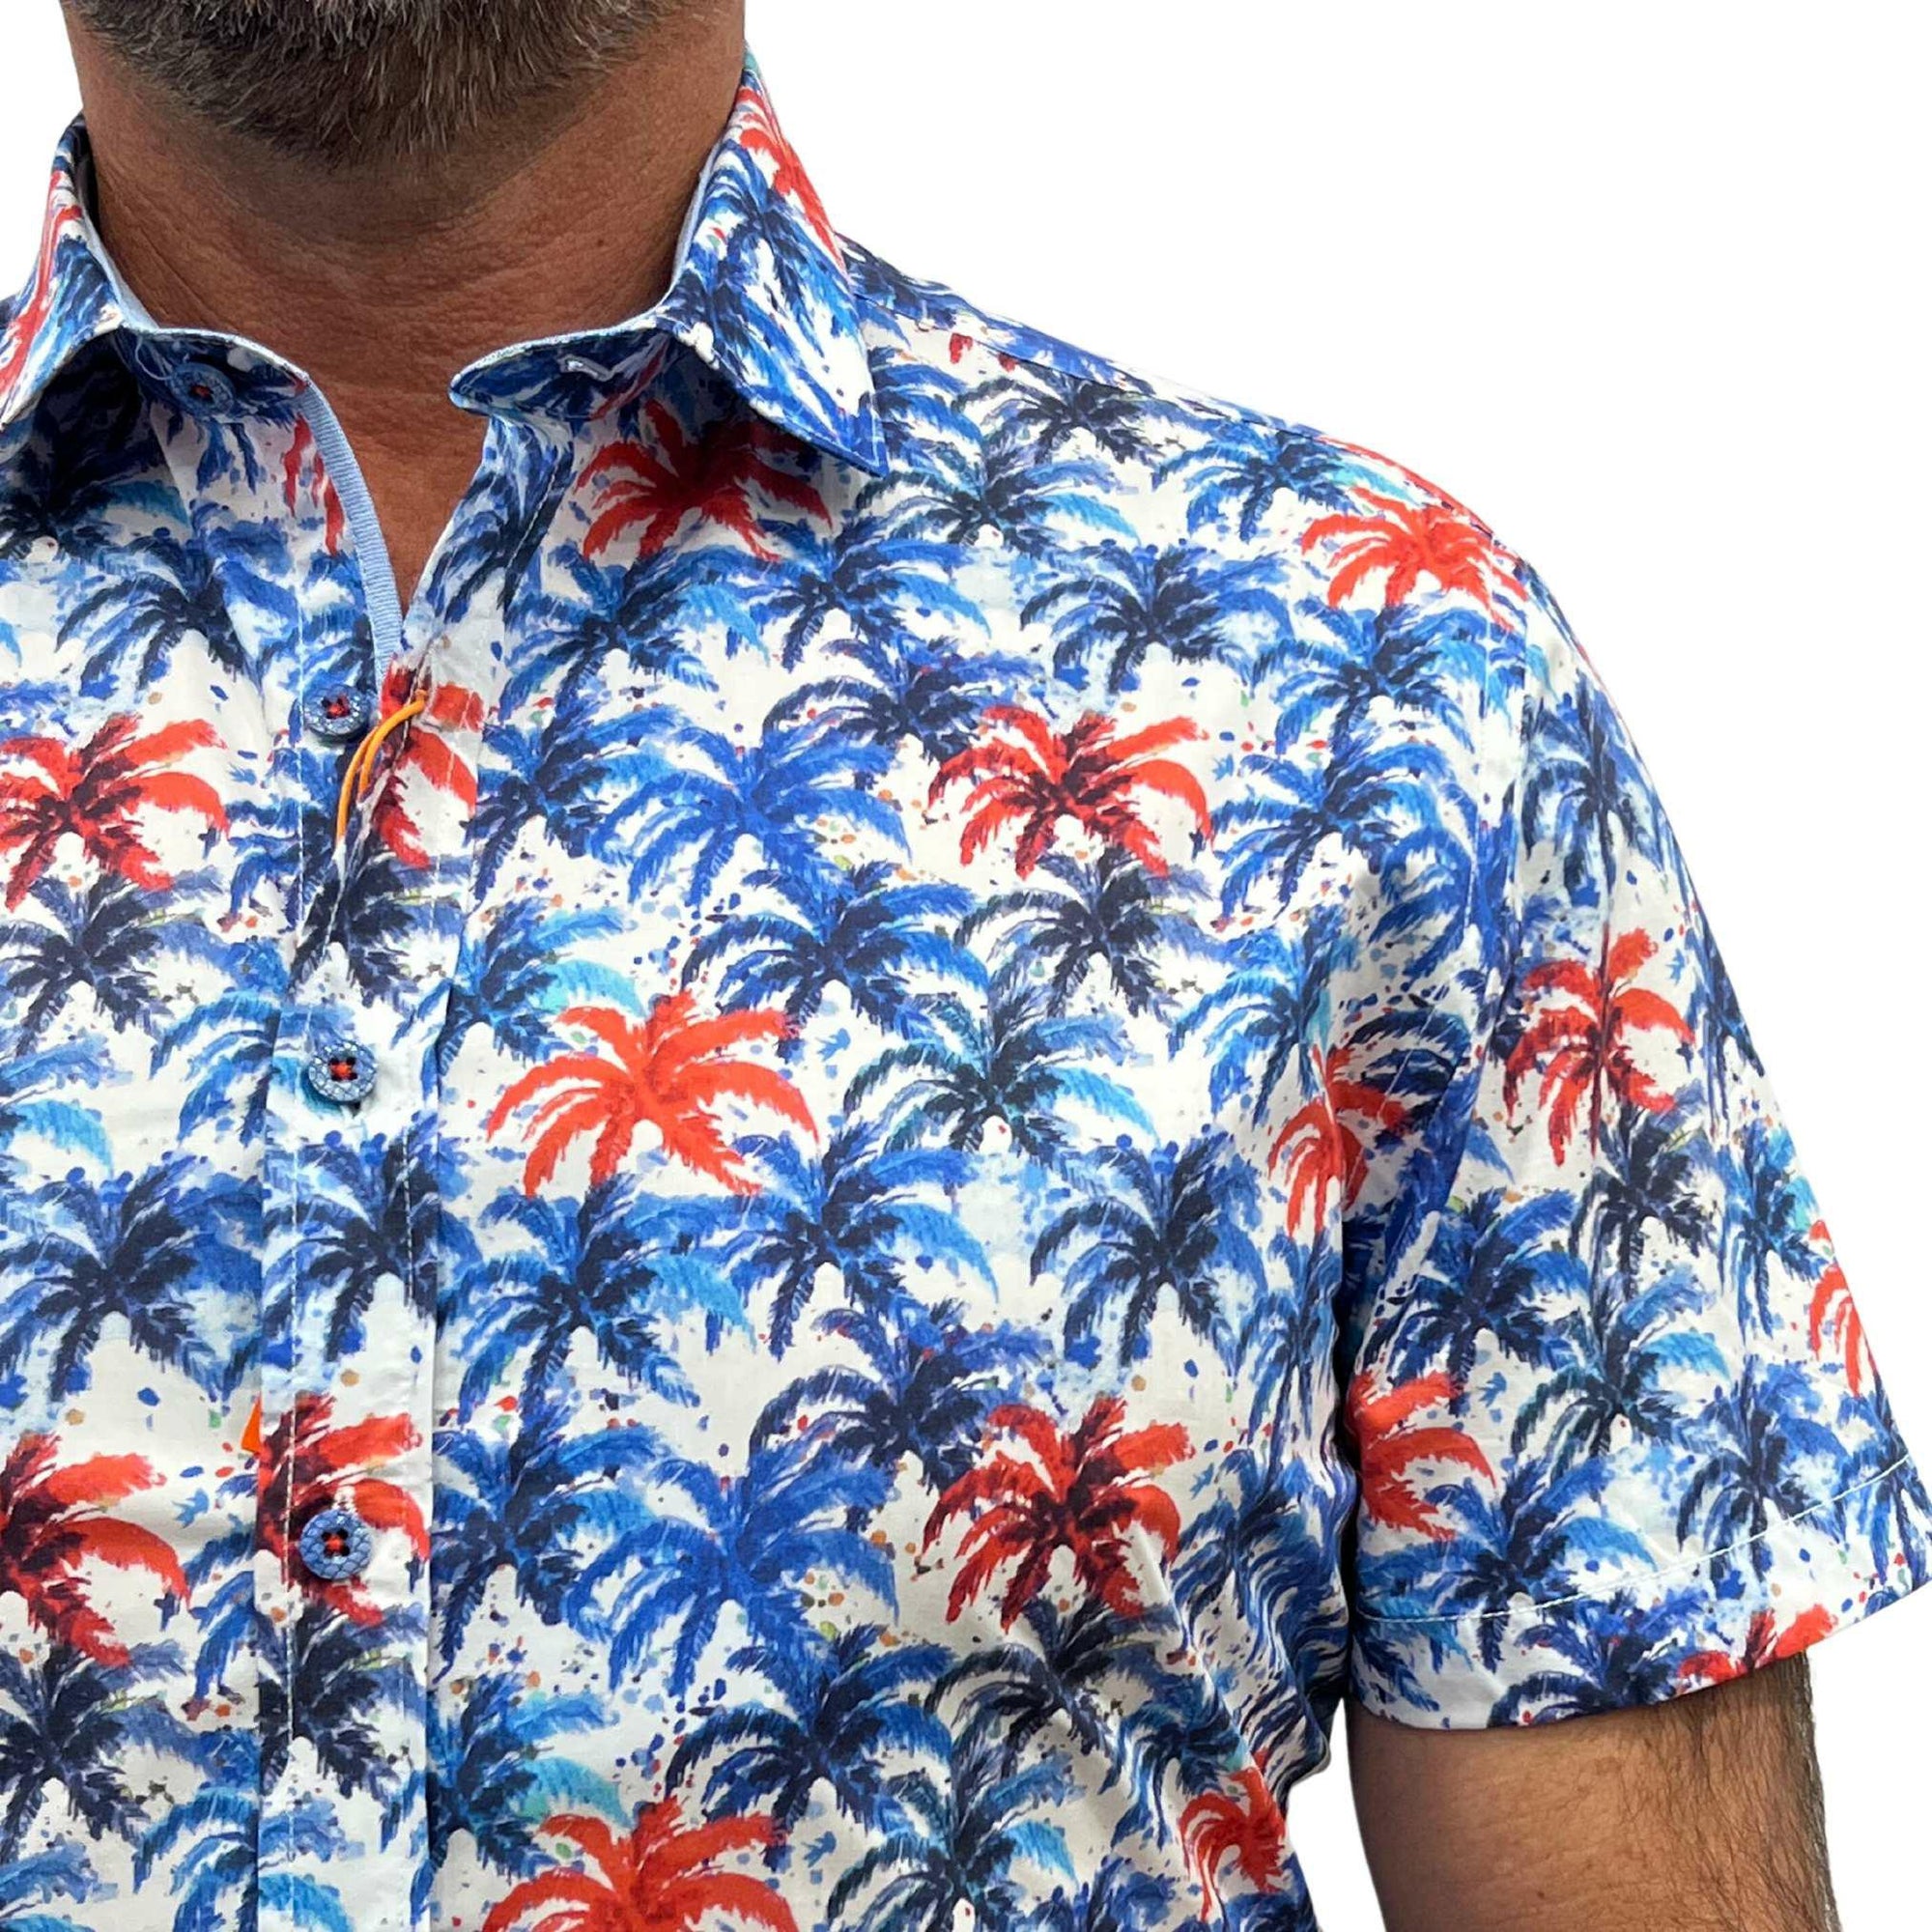 A Fish Named Fred Carnival Light Blu S/S Shirt